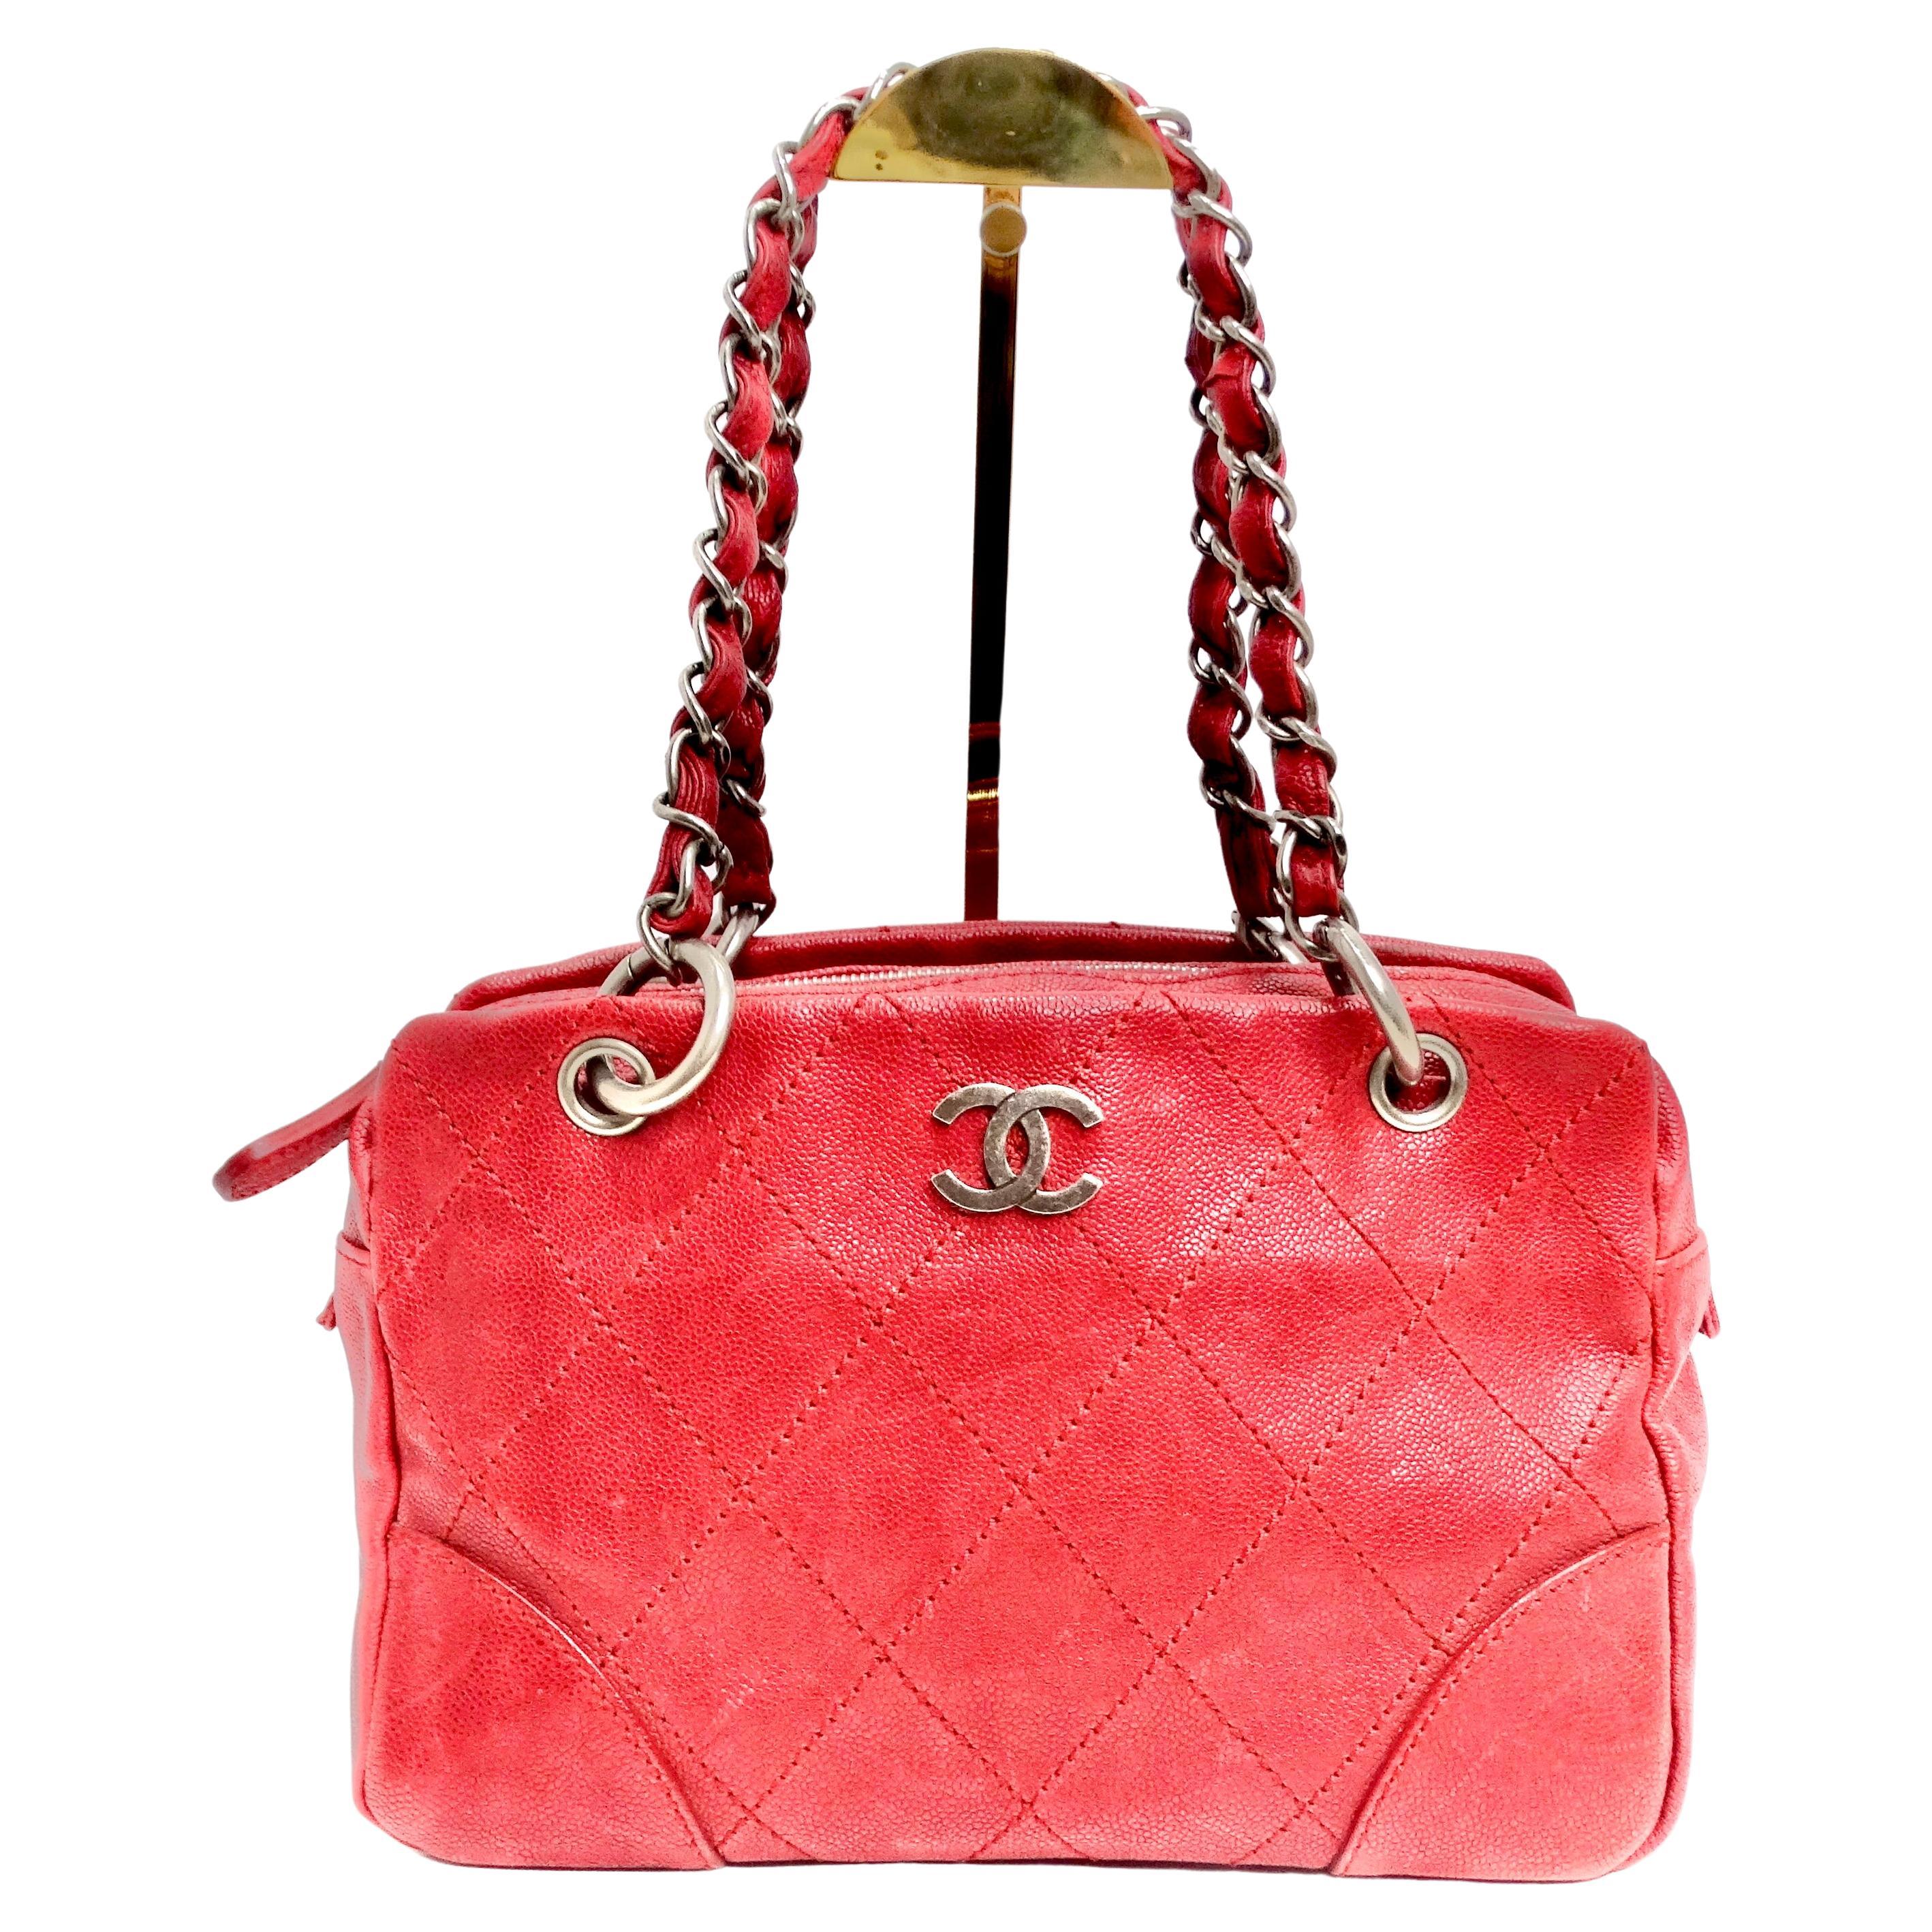 Chanel Quilted Caviar Red Leather Shoulder Bag For Sale